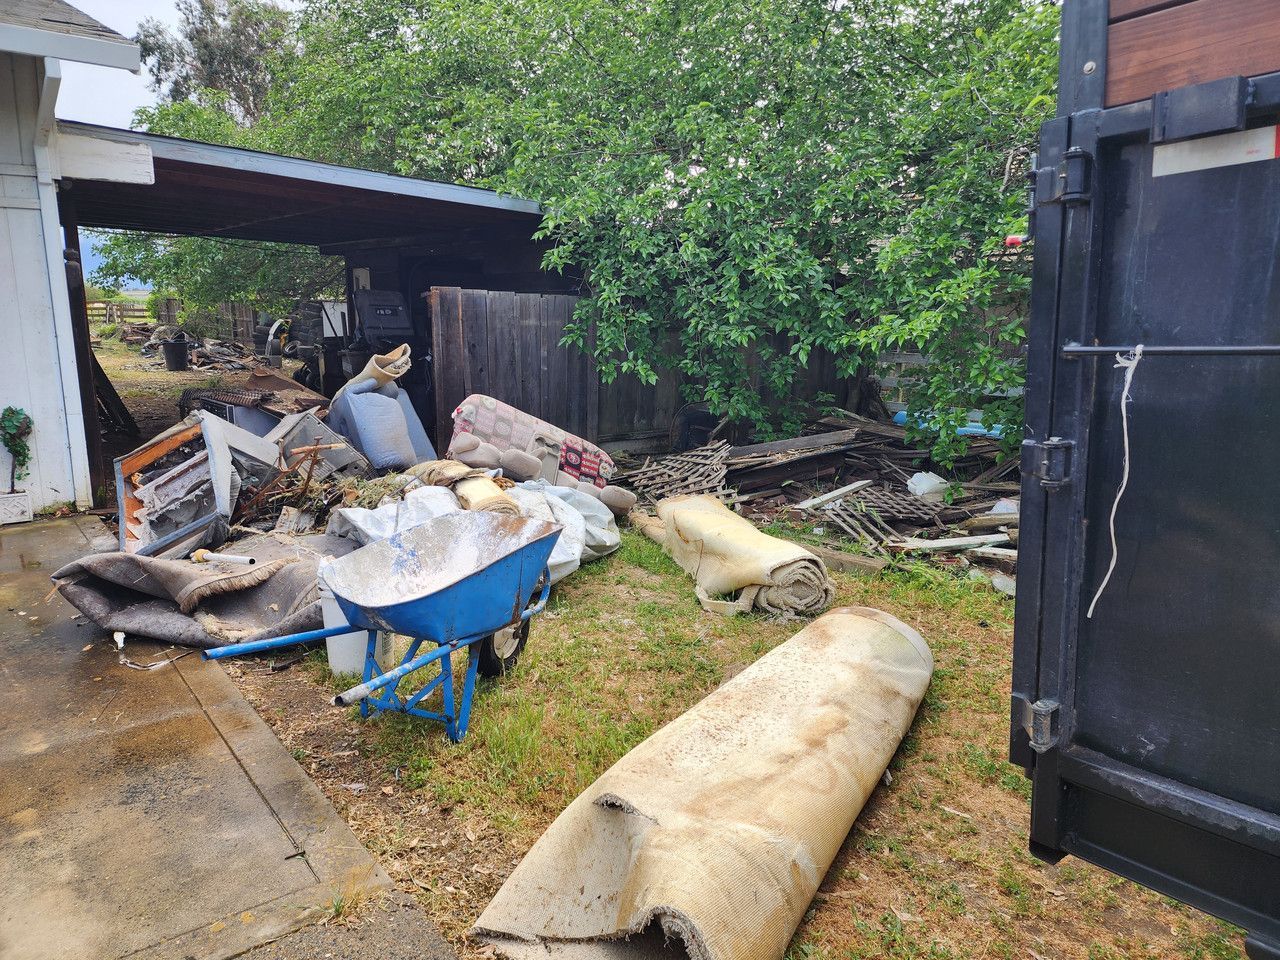 pile of trash on side of house in the grass. Trash items include carpets, chairs, a wheelbarrow and various other items